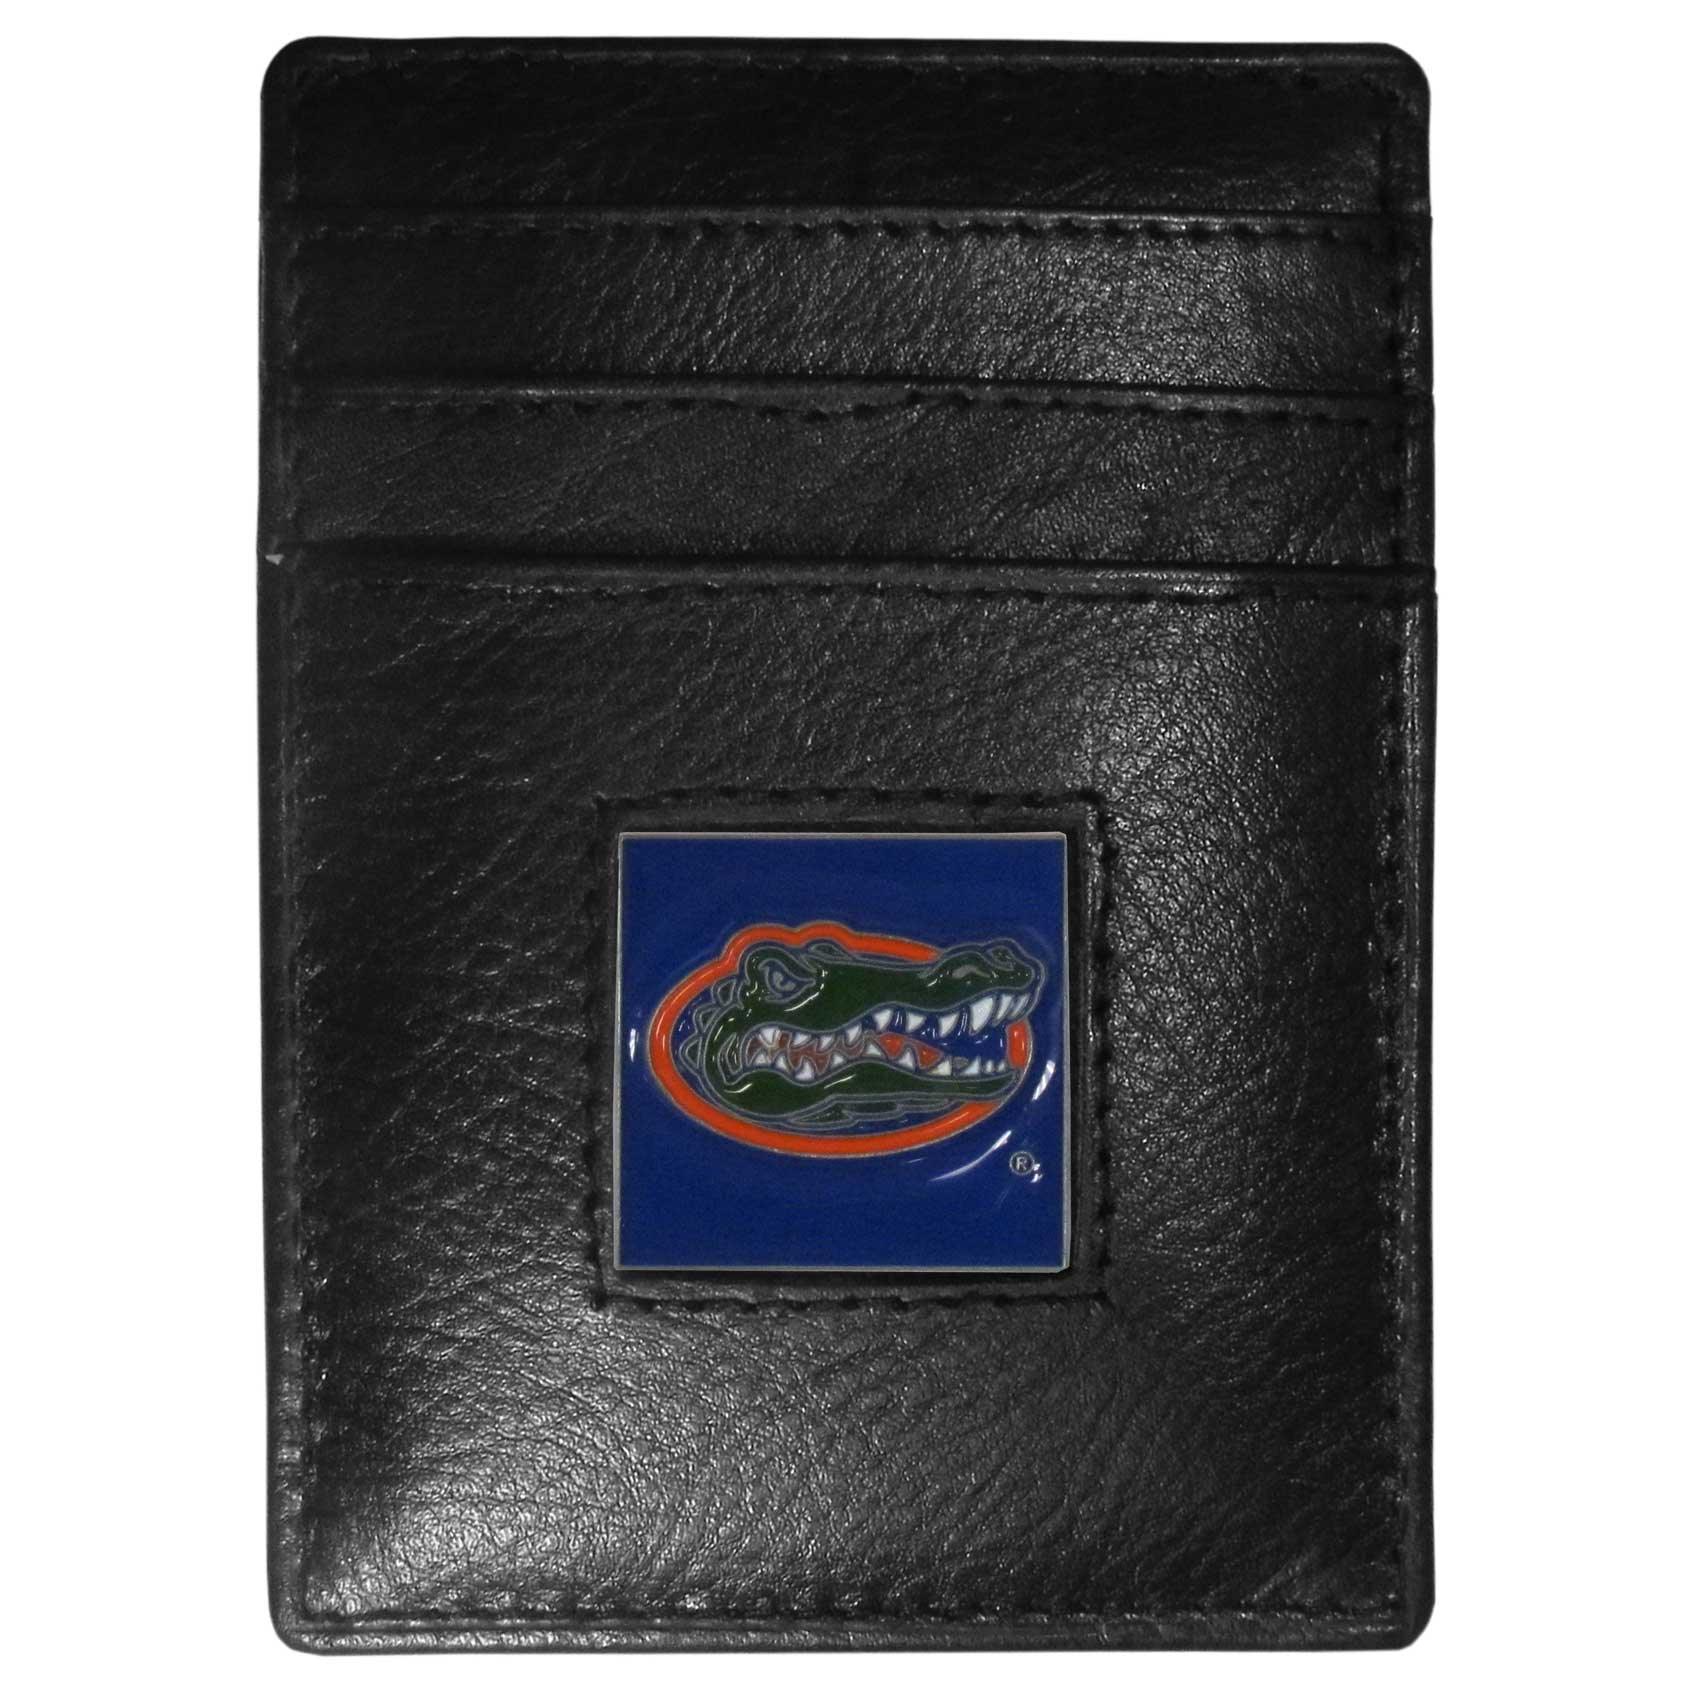 Florida Gators Leather Money Clip/Cardholder Packaged in Gift Box - Flyclothing LLC